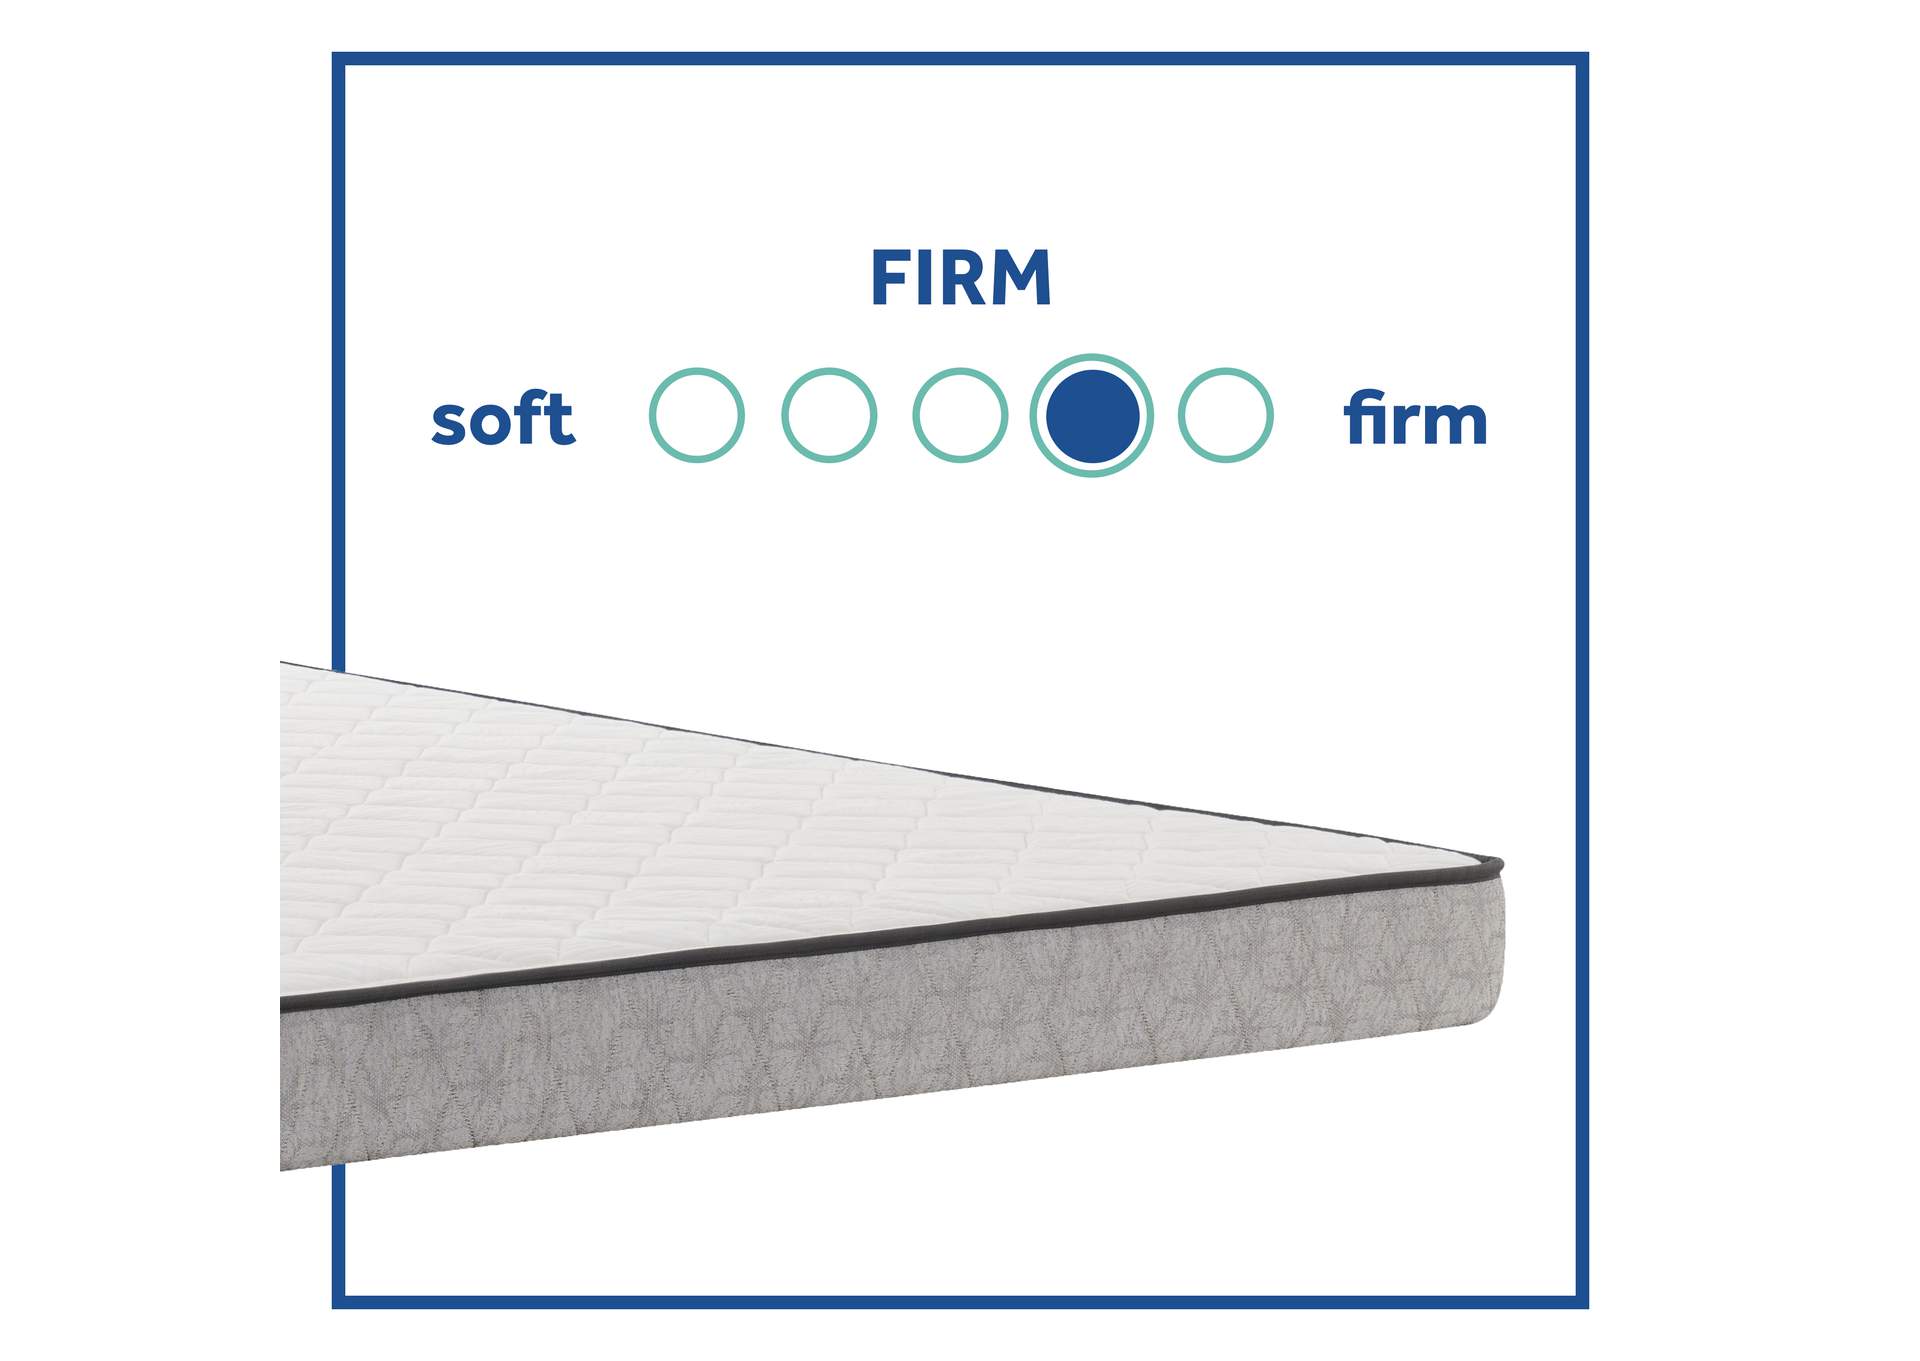 Spruce Tight Top Full Mattress,Sealy